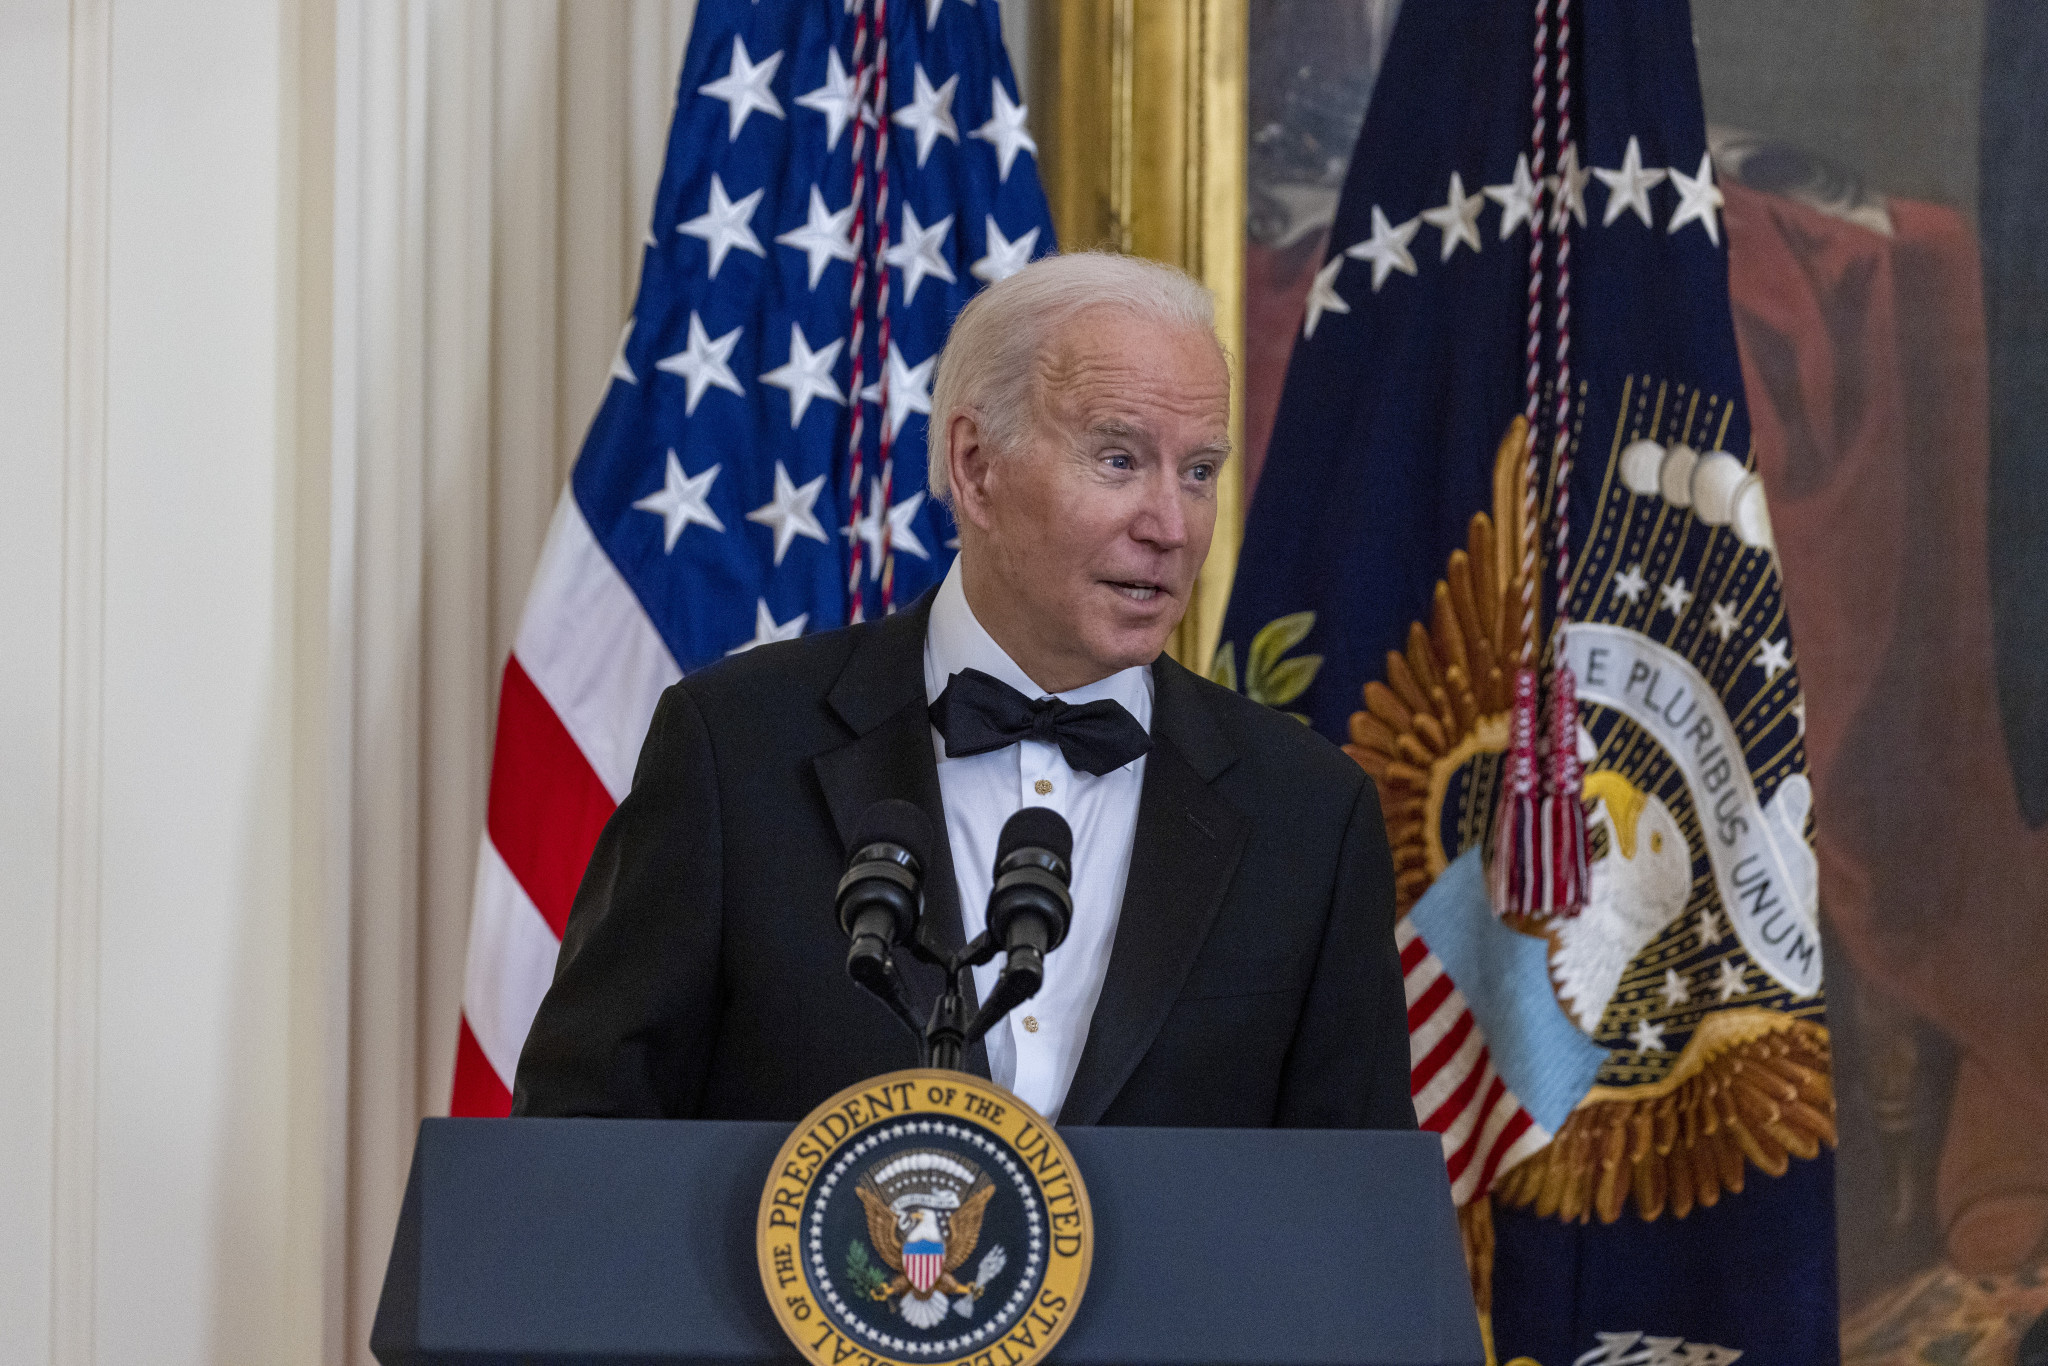 US President Joe Biden confirmed for the first time publicly last month that his administration was considering a diplomatic boycott of Beijing 2022 ©Getty Images